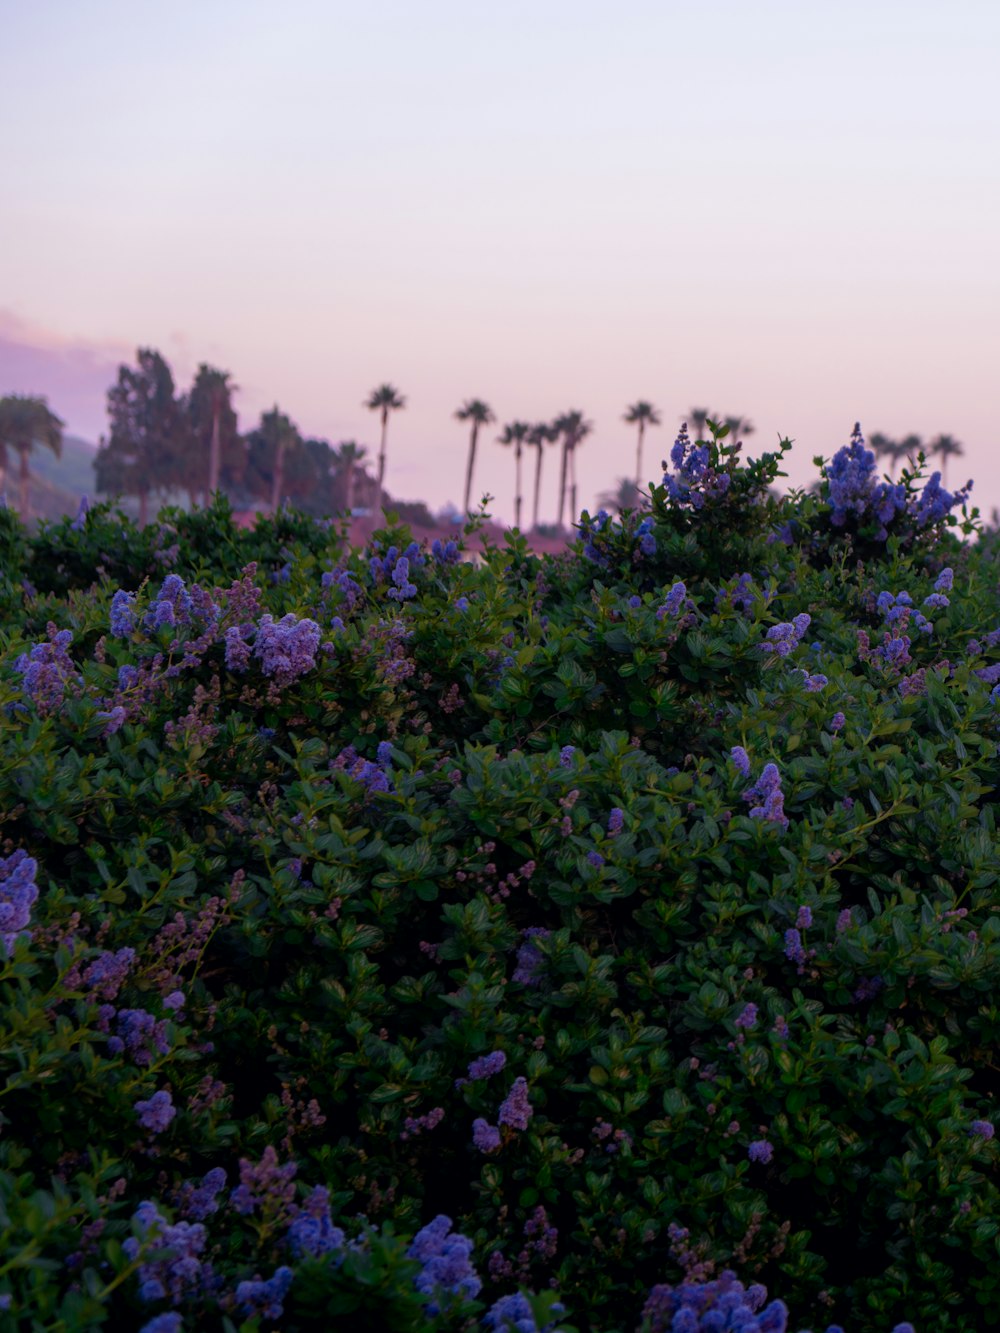 a field of purple flowers with palm trees in the background